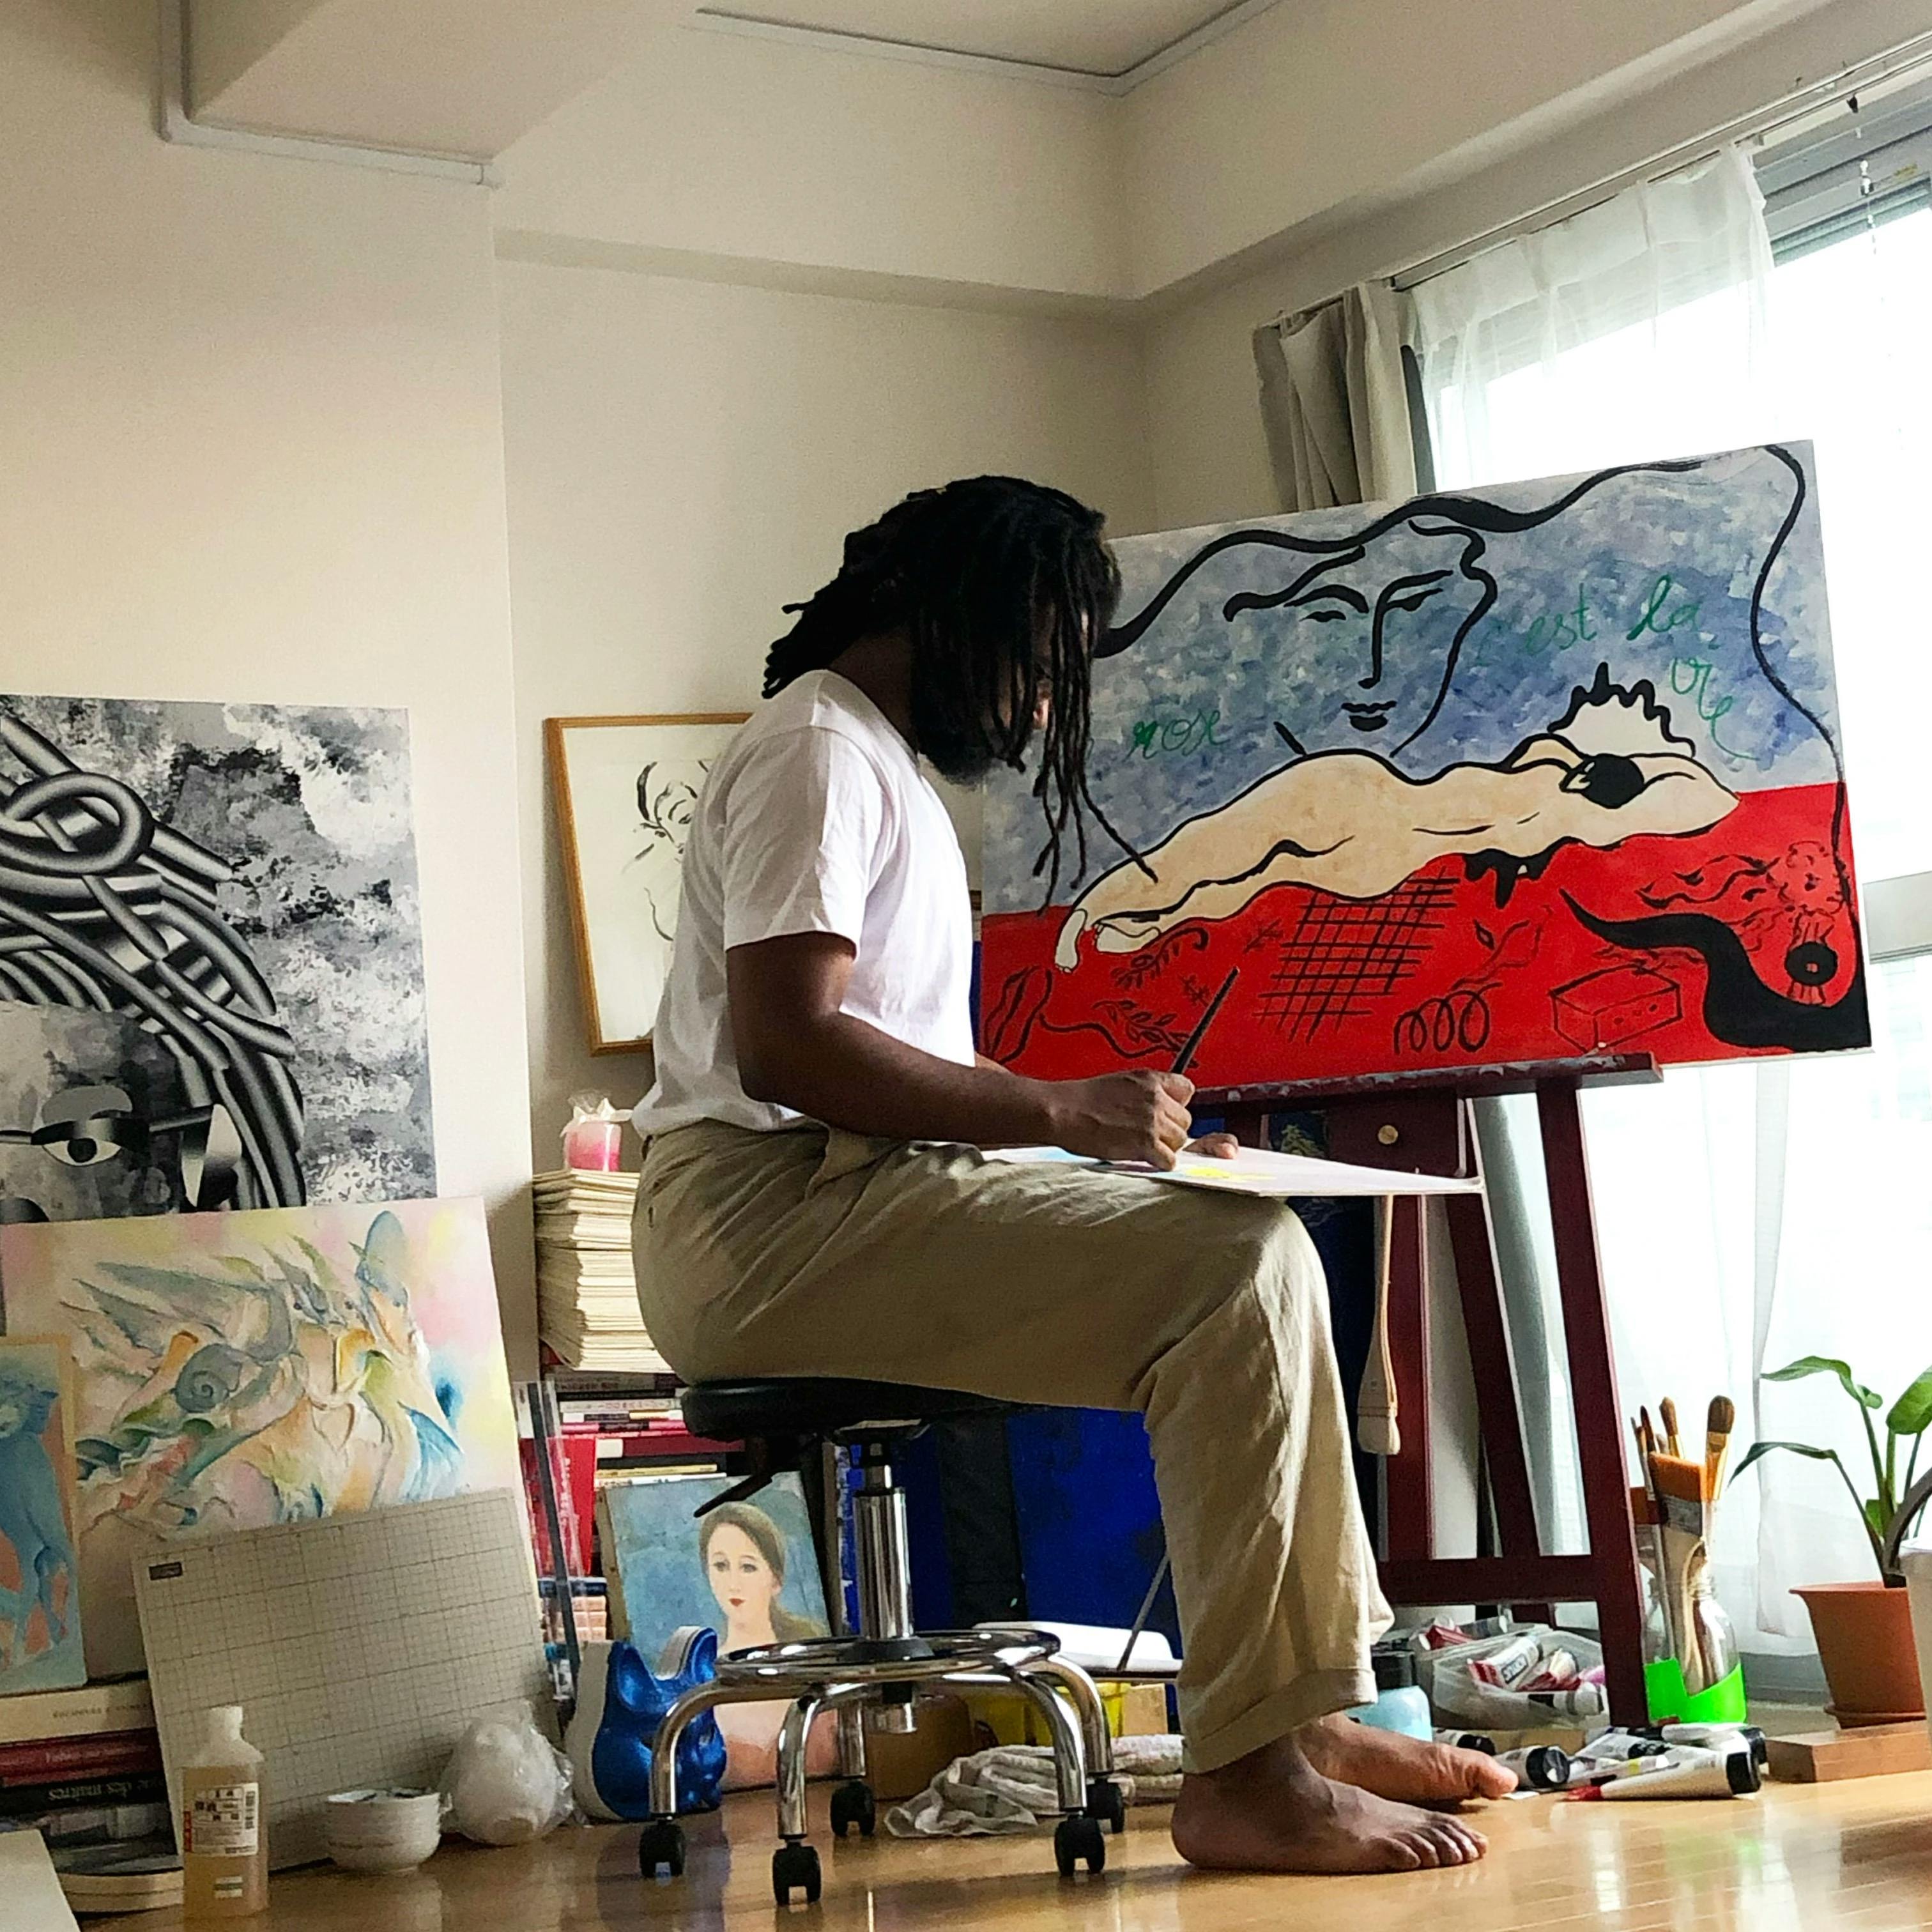 Artist Ba Ousmane in his studio, sitting on a stool and working on a red, white, and blue painting of a reclining woman.